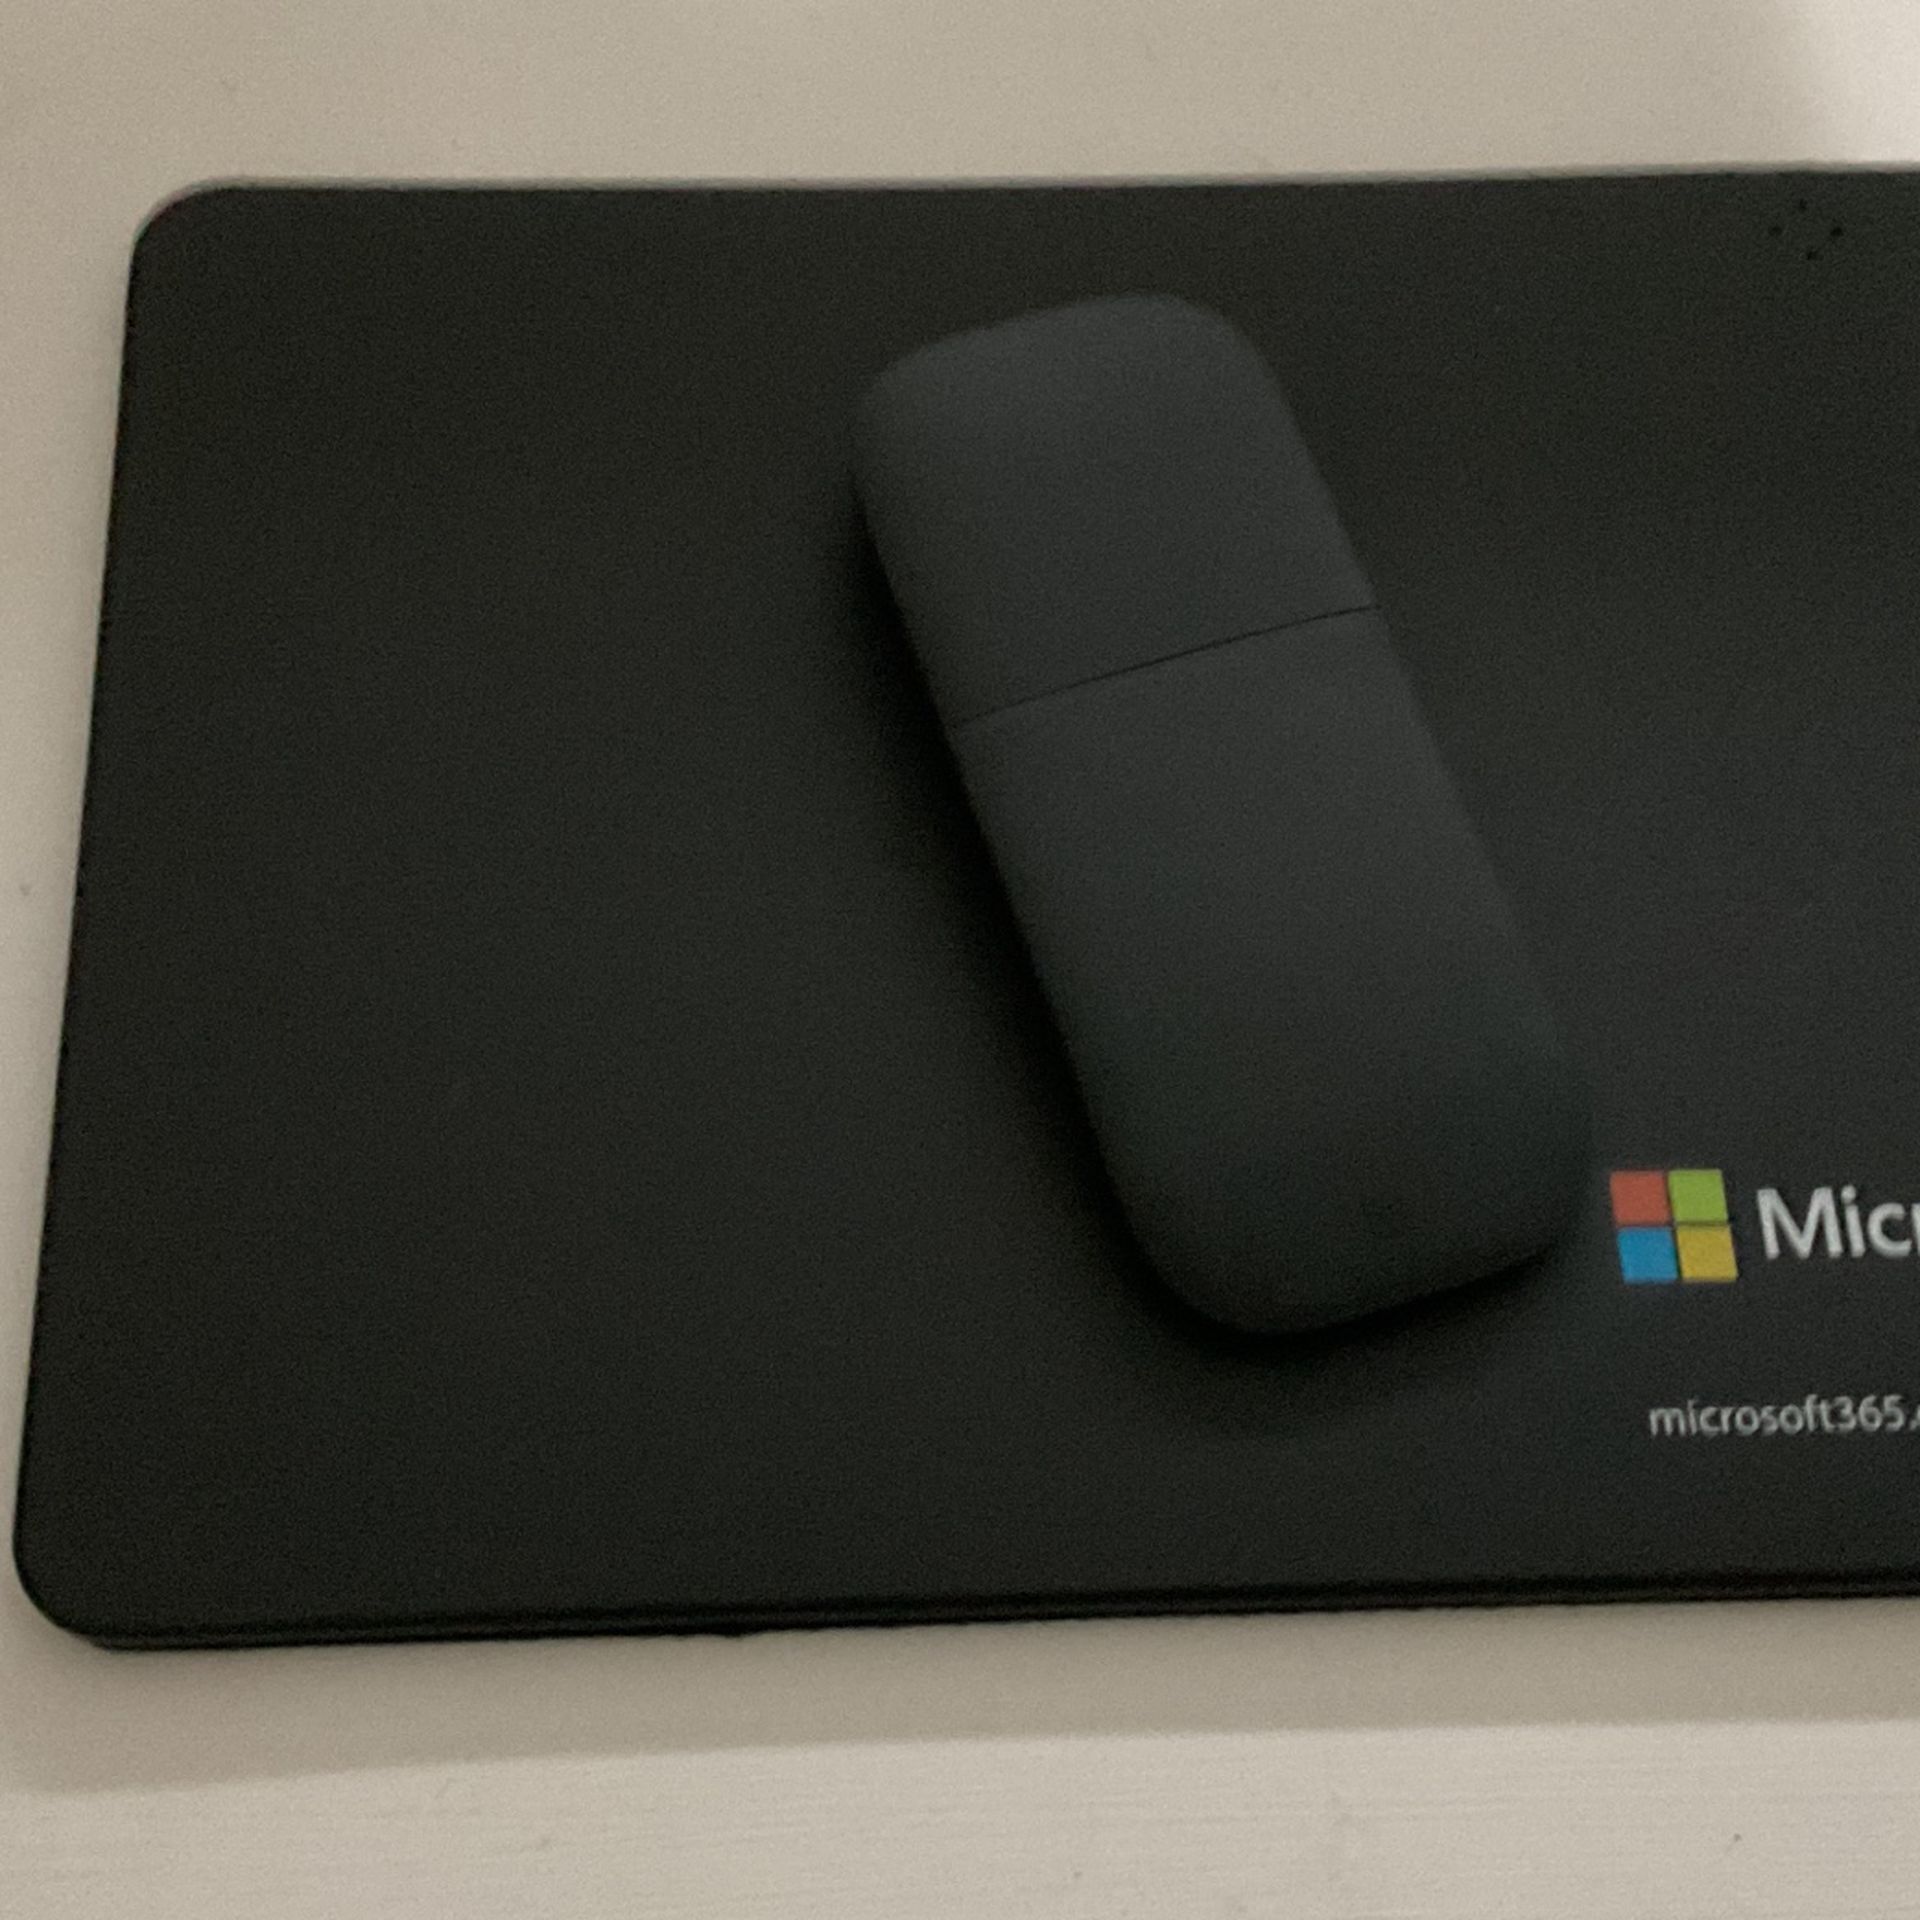 Microsoft Bending Arc Mouse And Microsoft Wireless Charging Mouse Pad For Productivity And Gaming